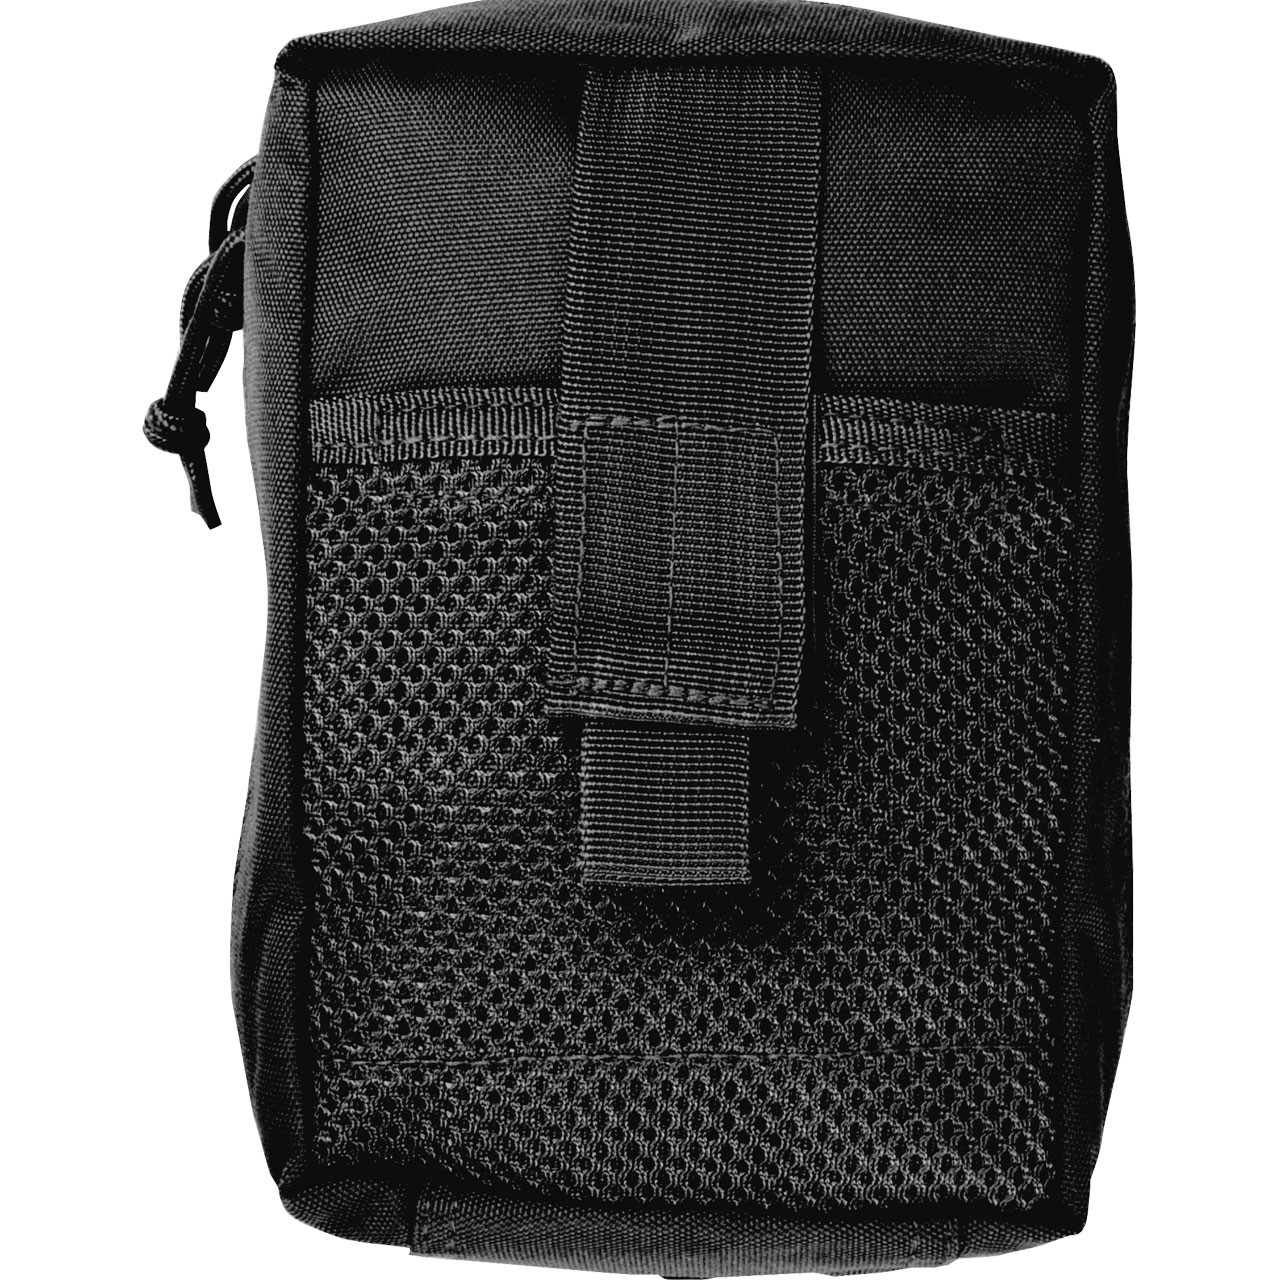 Large MOLLE Medic Pouch - Black - Front